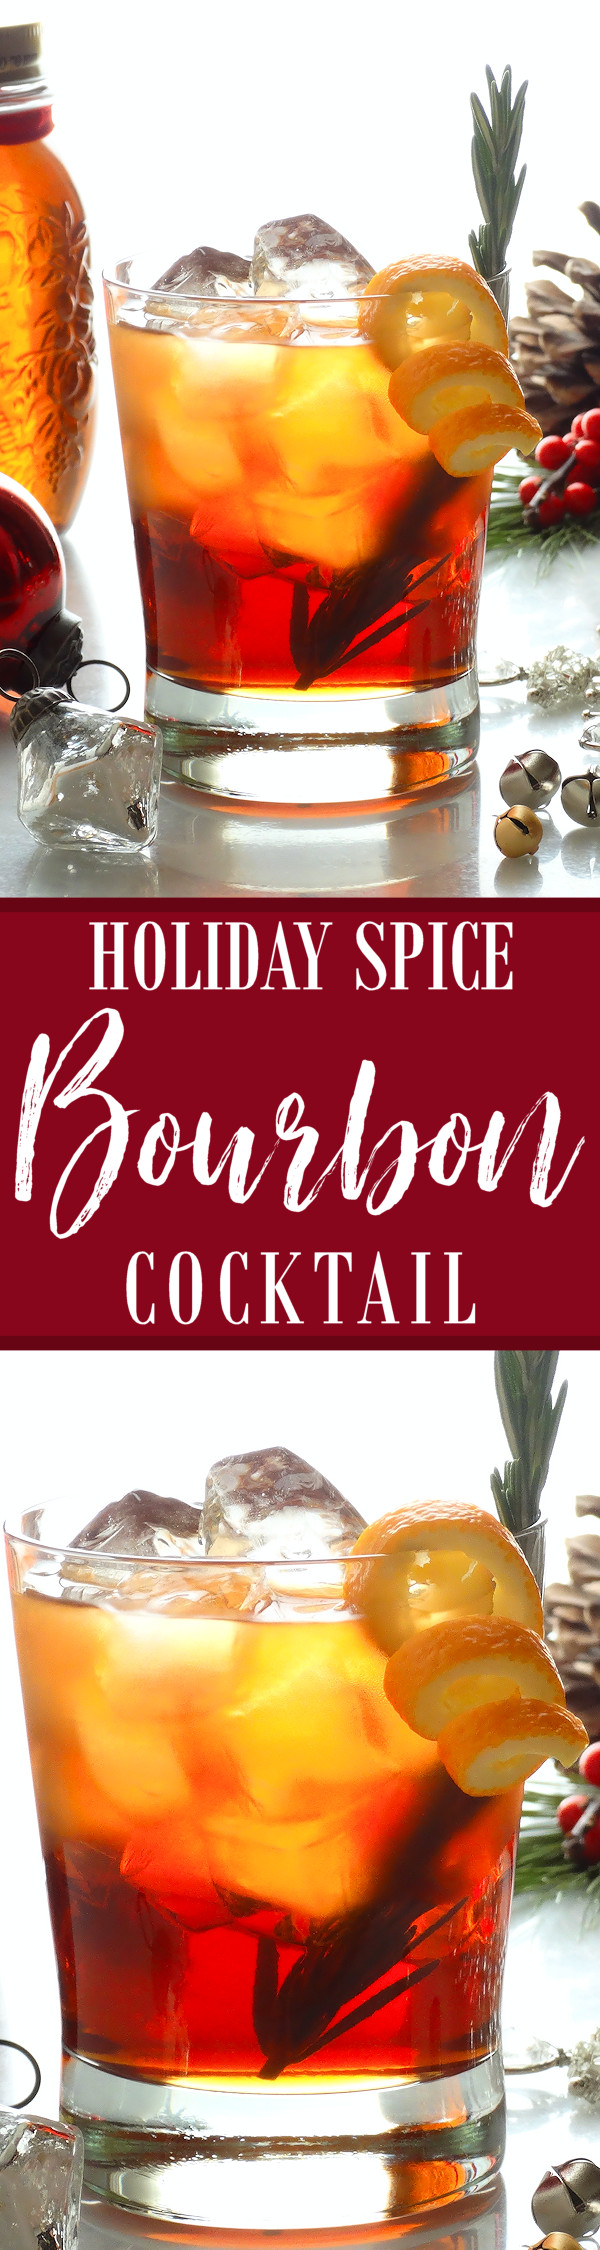 Bourbon Holiday Drinks
 Christmas in Connecticut Holiday Spice Bourbon Cocktail